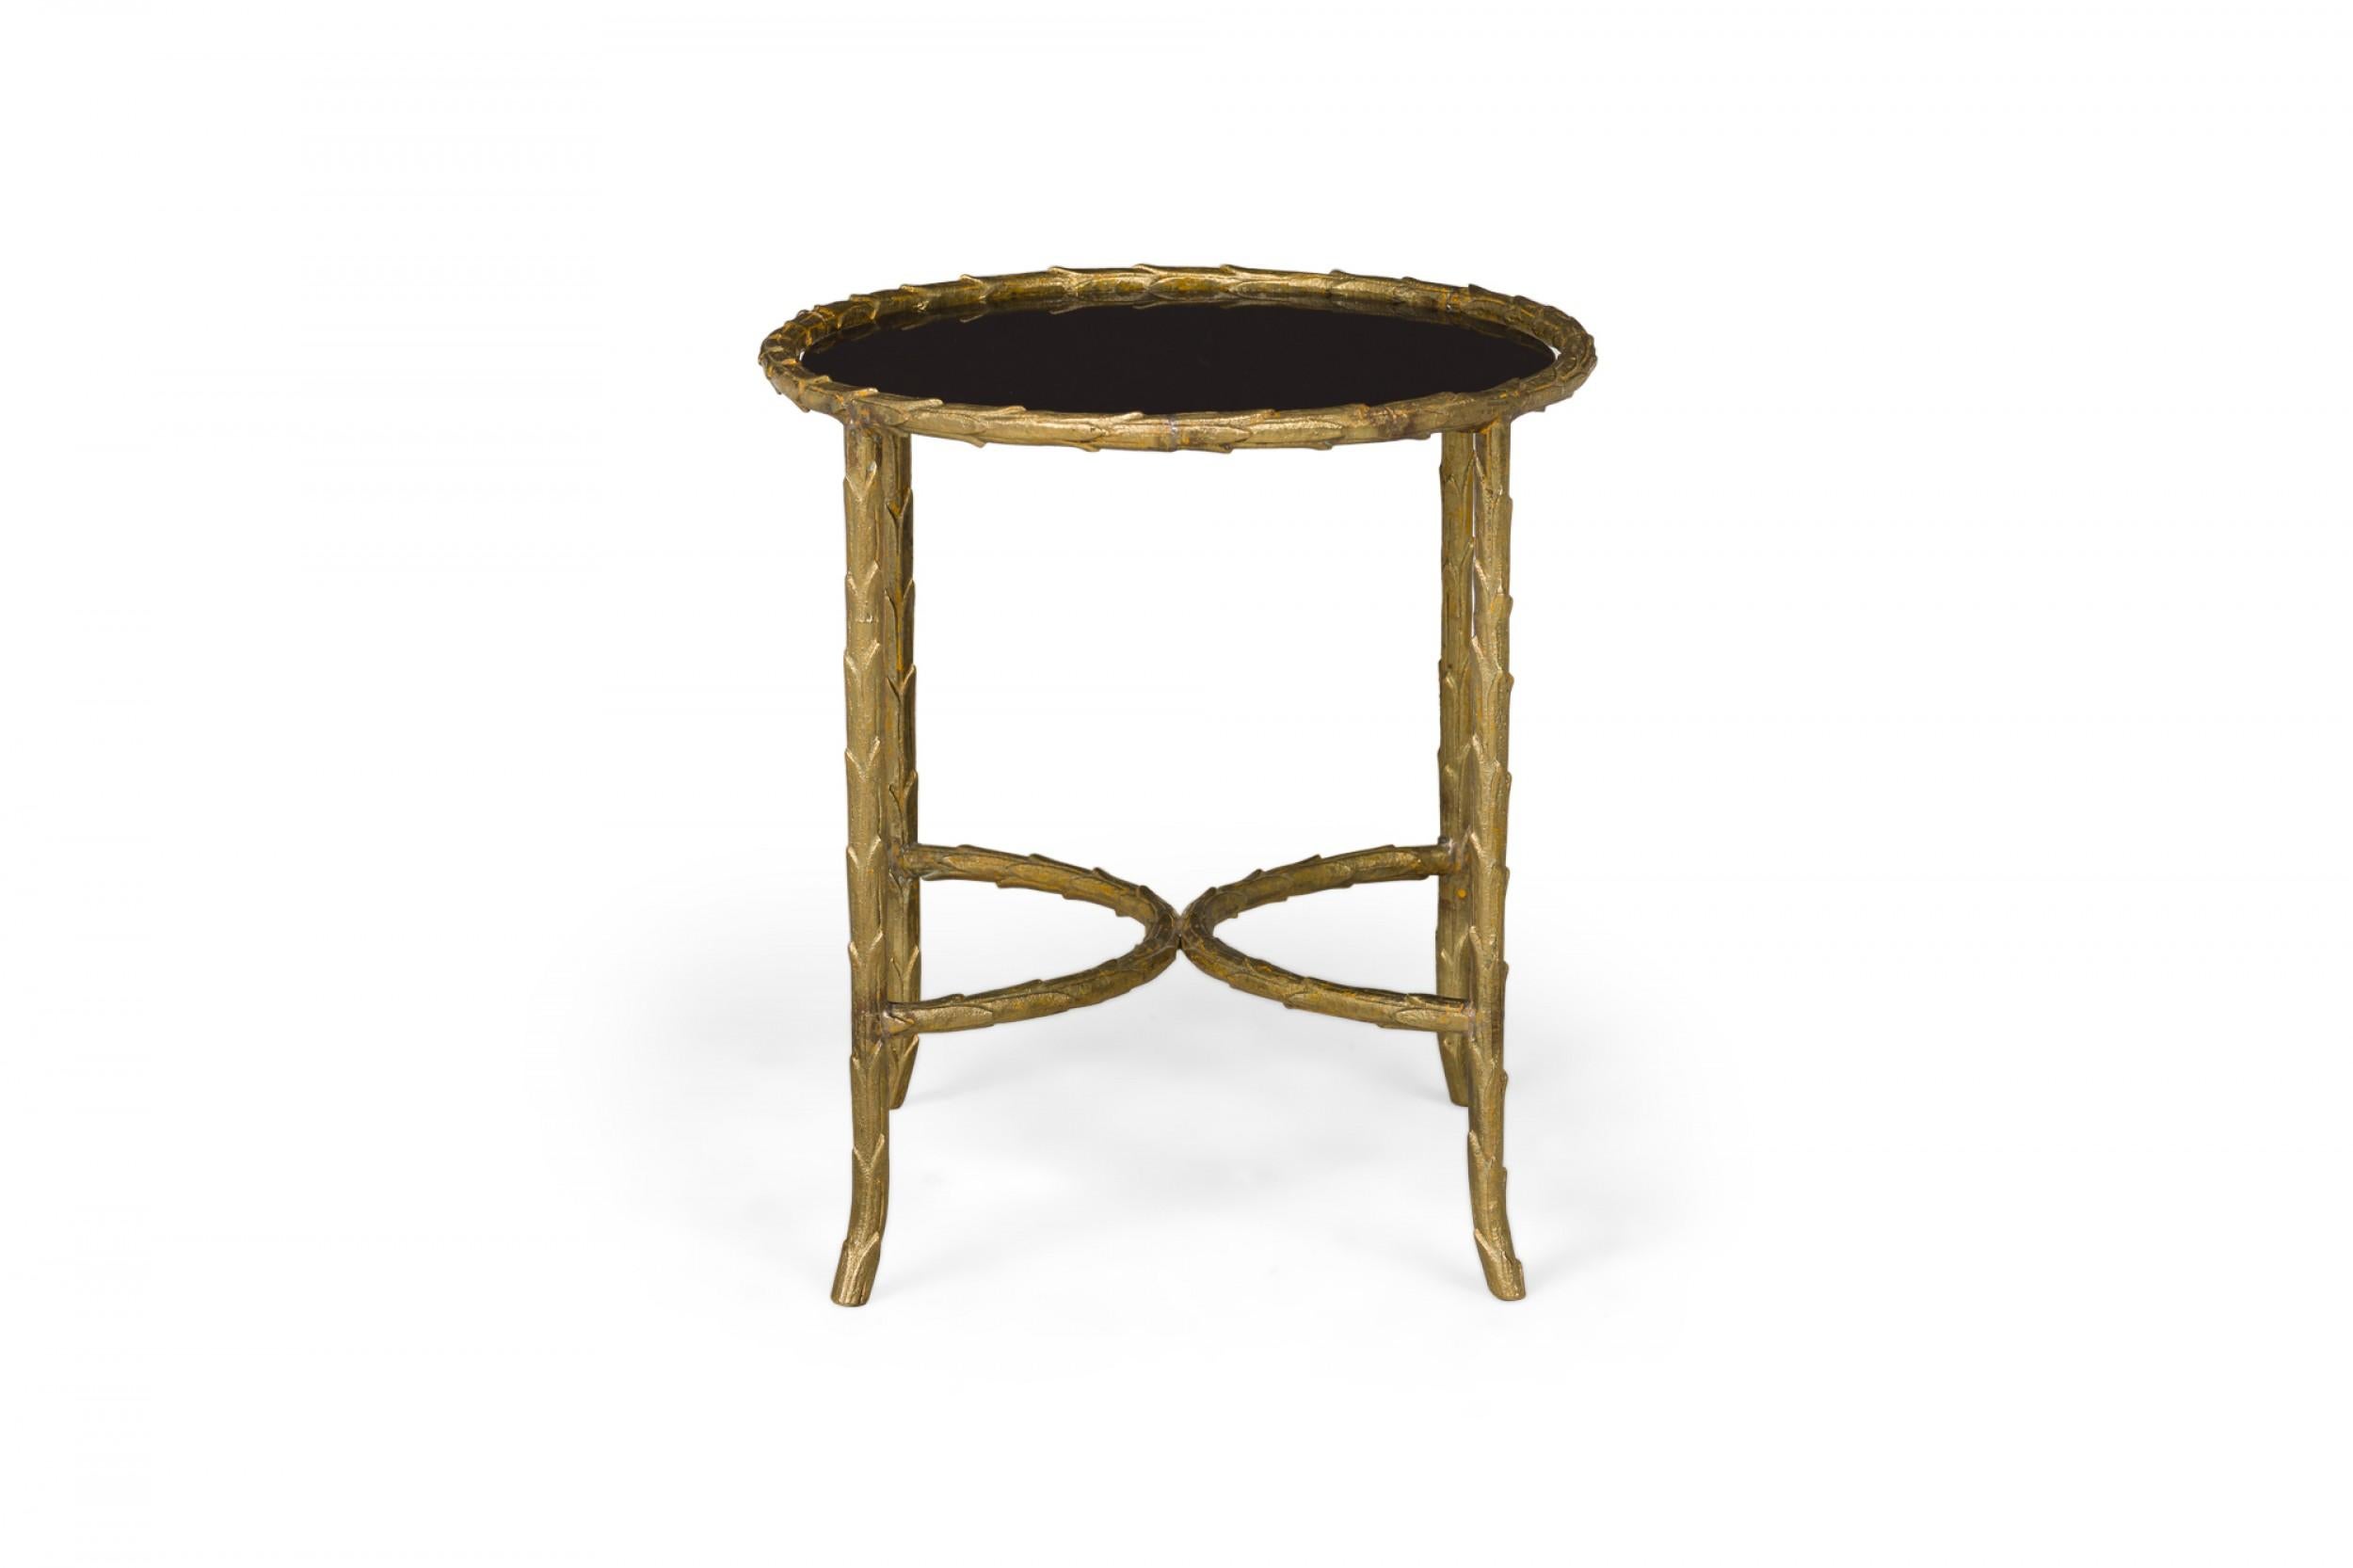 20th Century Art Deco French Gilt Bronze Faux Bamboo Oval End / Side Table with Black Glass For Sale